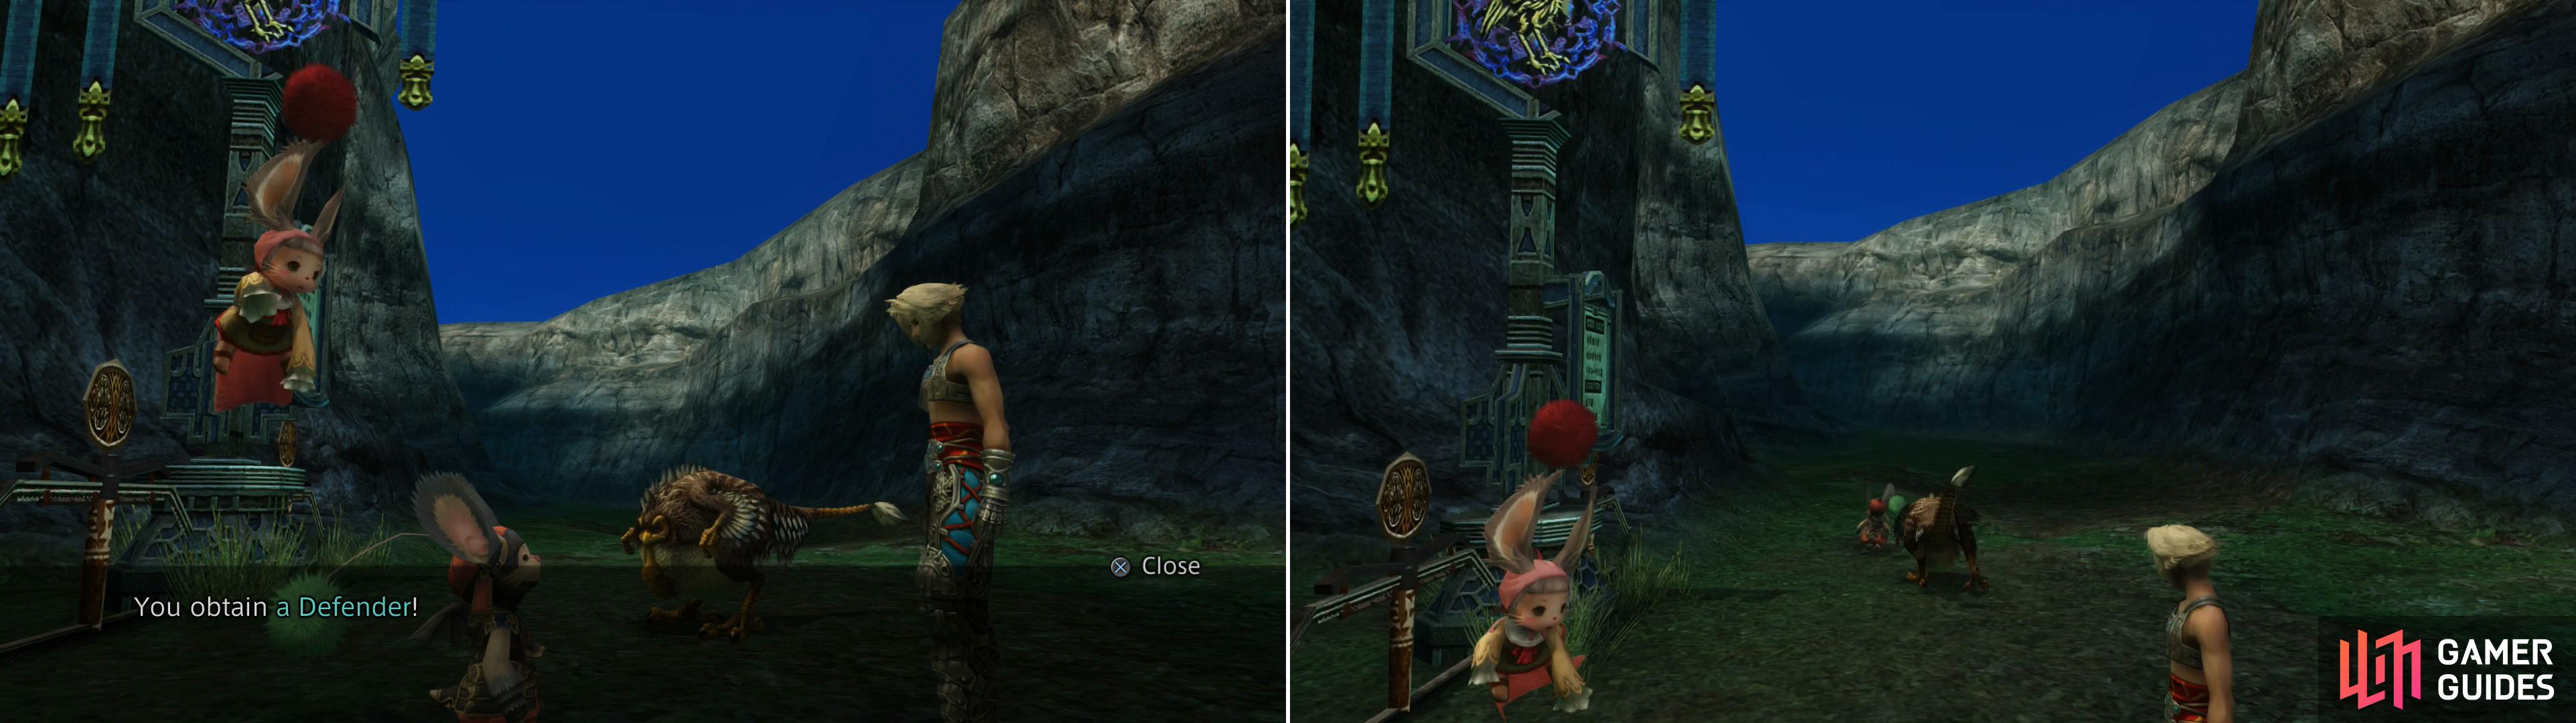 For helping the Moogle rent a Chocobo worthy of his funds you'll be rewarded with a Defender (left) after which the "Chocobo" will find that the gig isn't all it's cracked up to be (right).